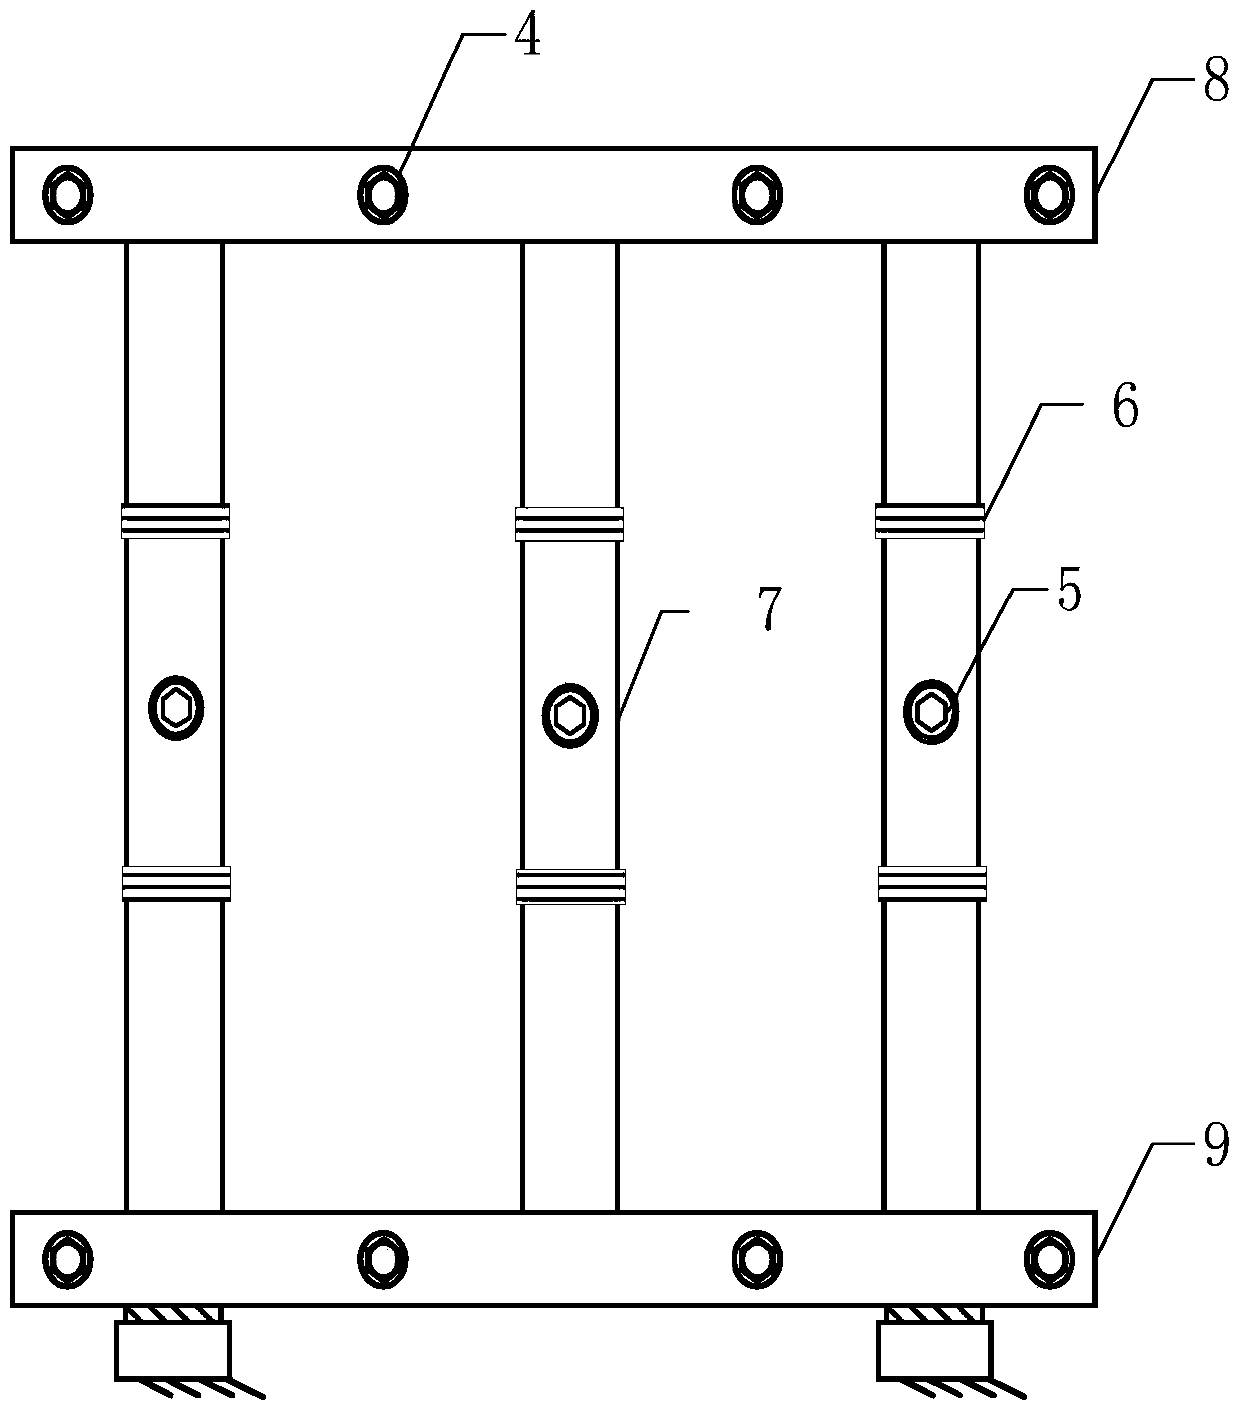 A fiber sandwich transformer core and its stacking method